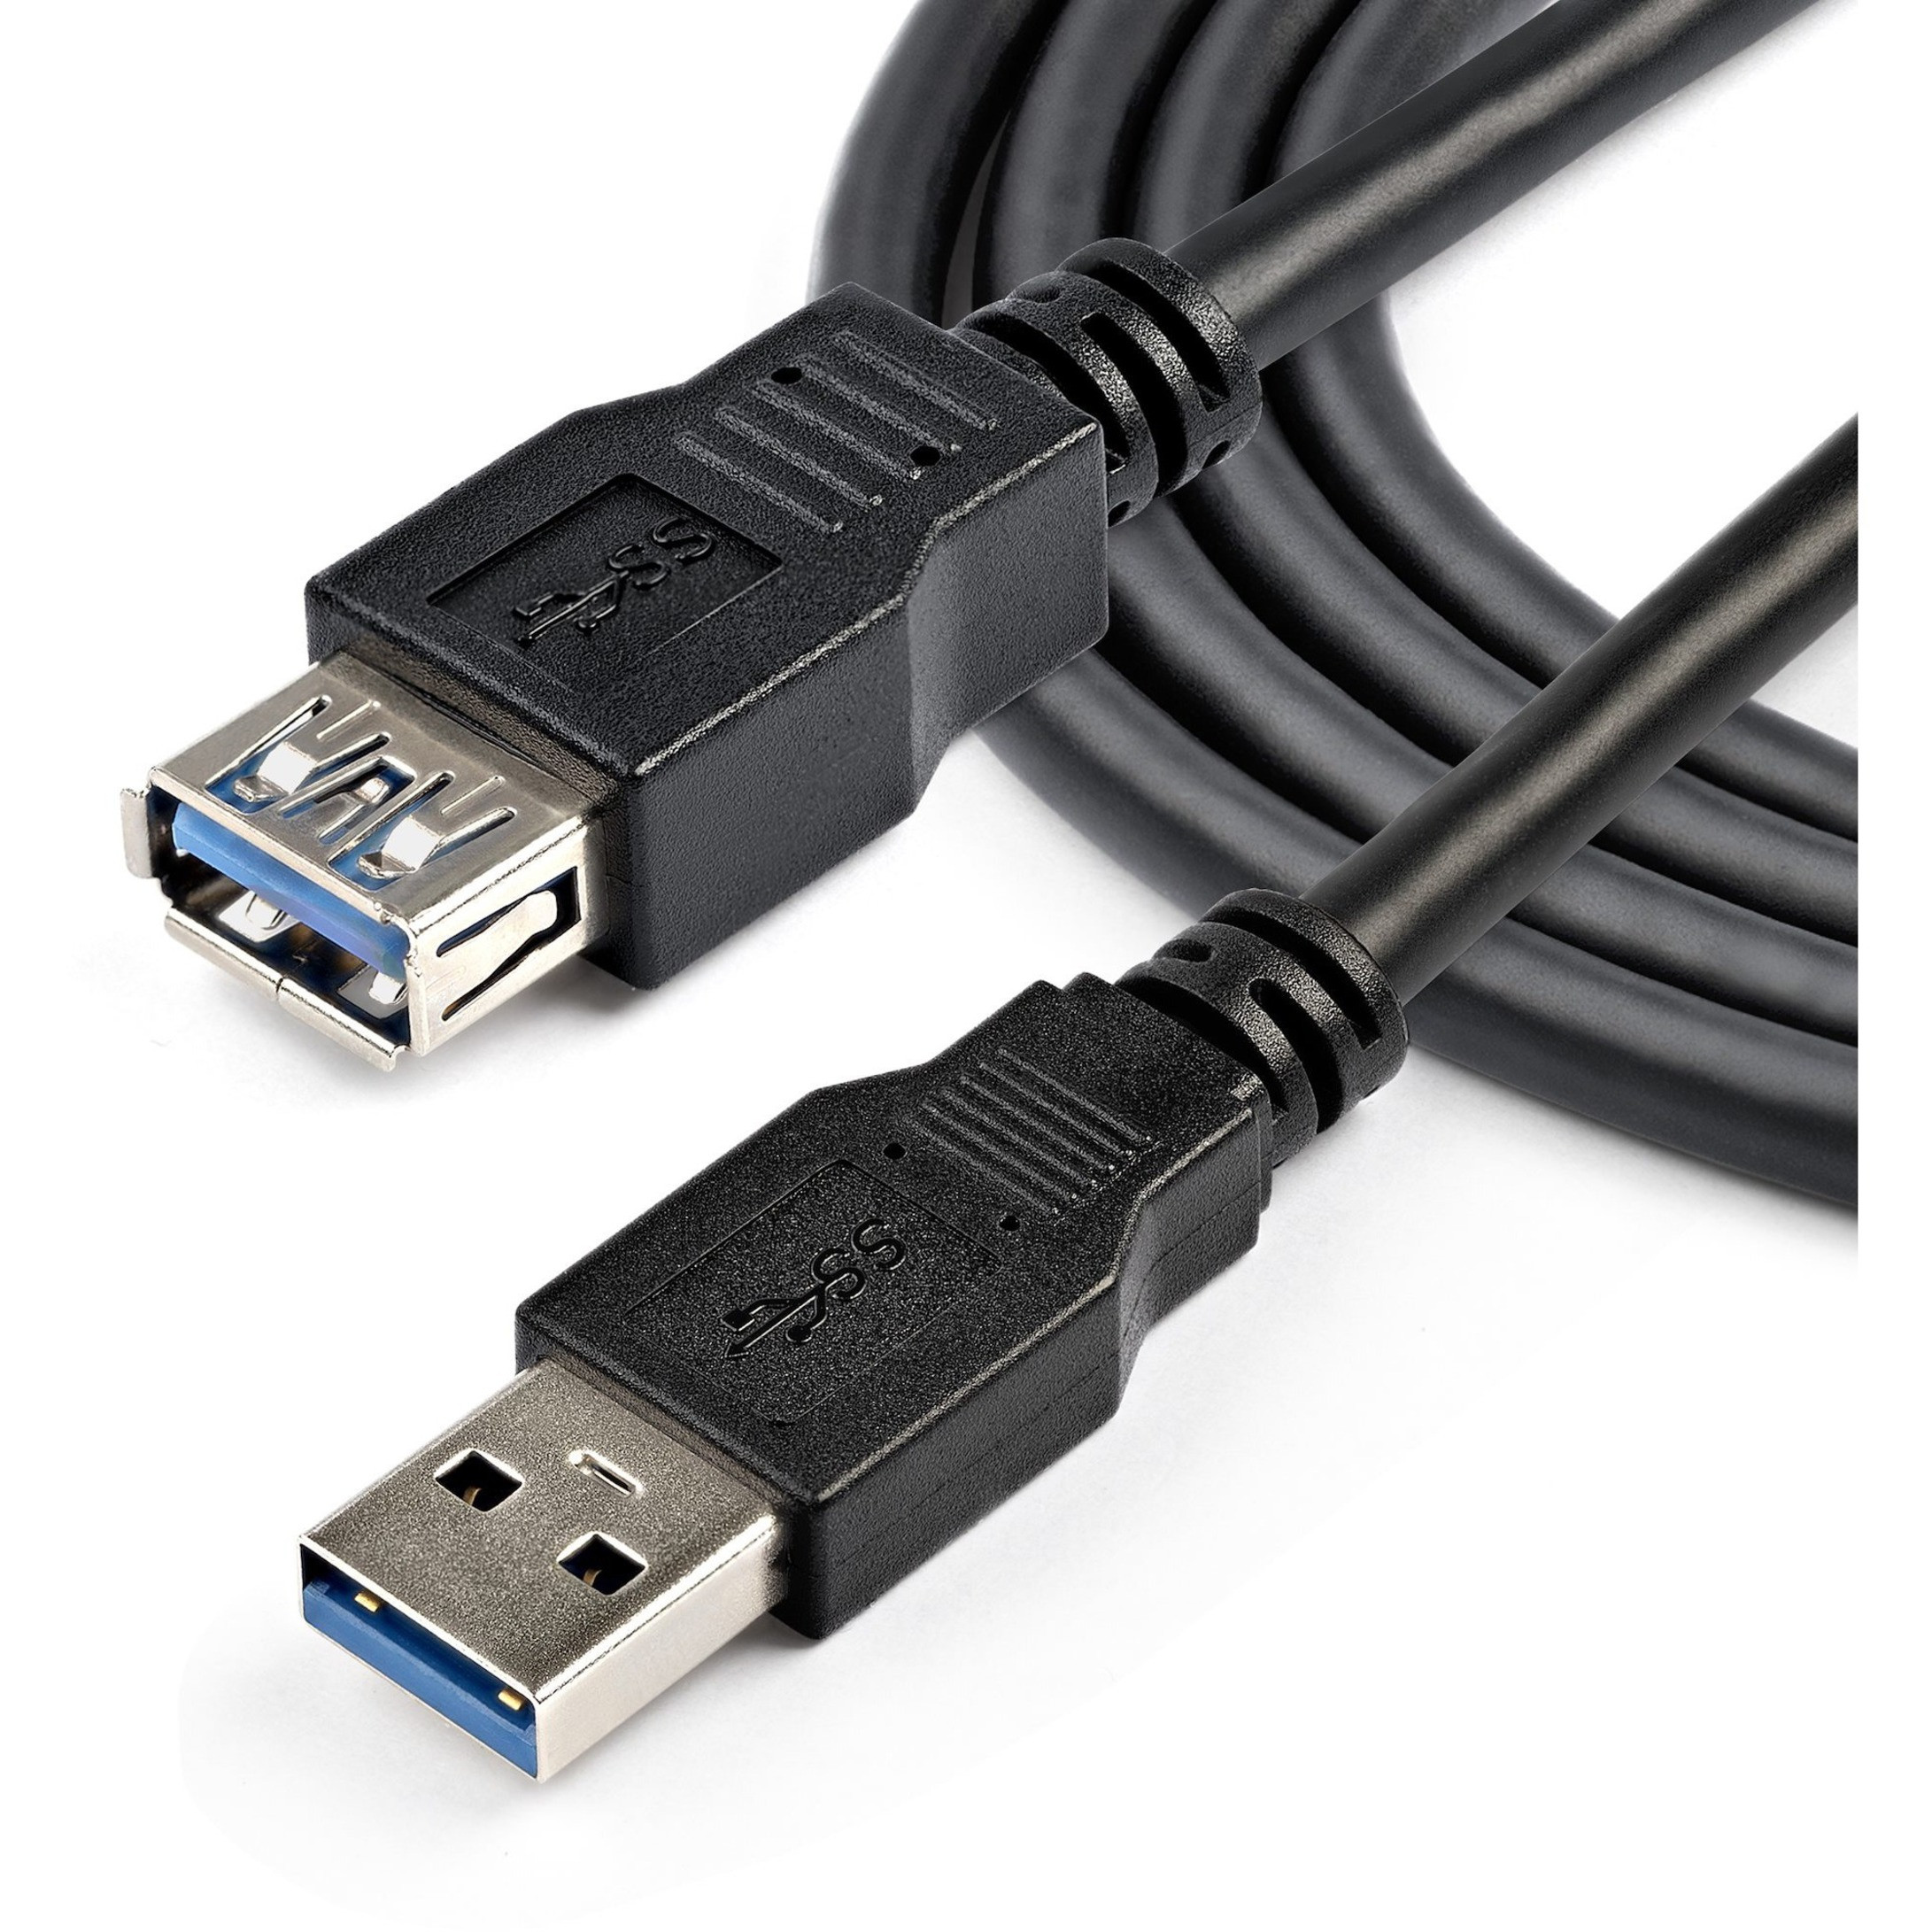 Bil teori hjul Startech .com 2m Black SuperSpeed USB 3.0 Extension Cable A to AM/FExtend  your SuperSpeed USB 3.0 cable by up to an additional 2 meter...  USB3SEXT2MBK - Corporate Armor